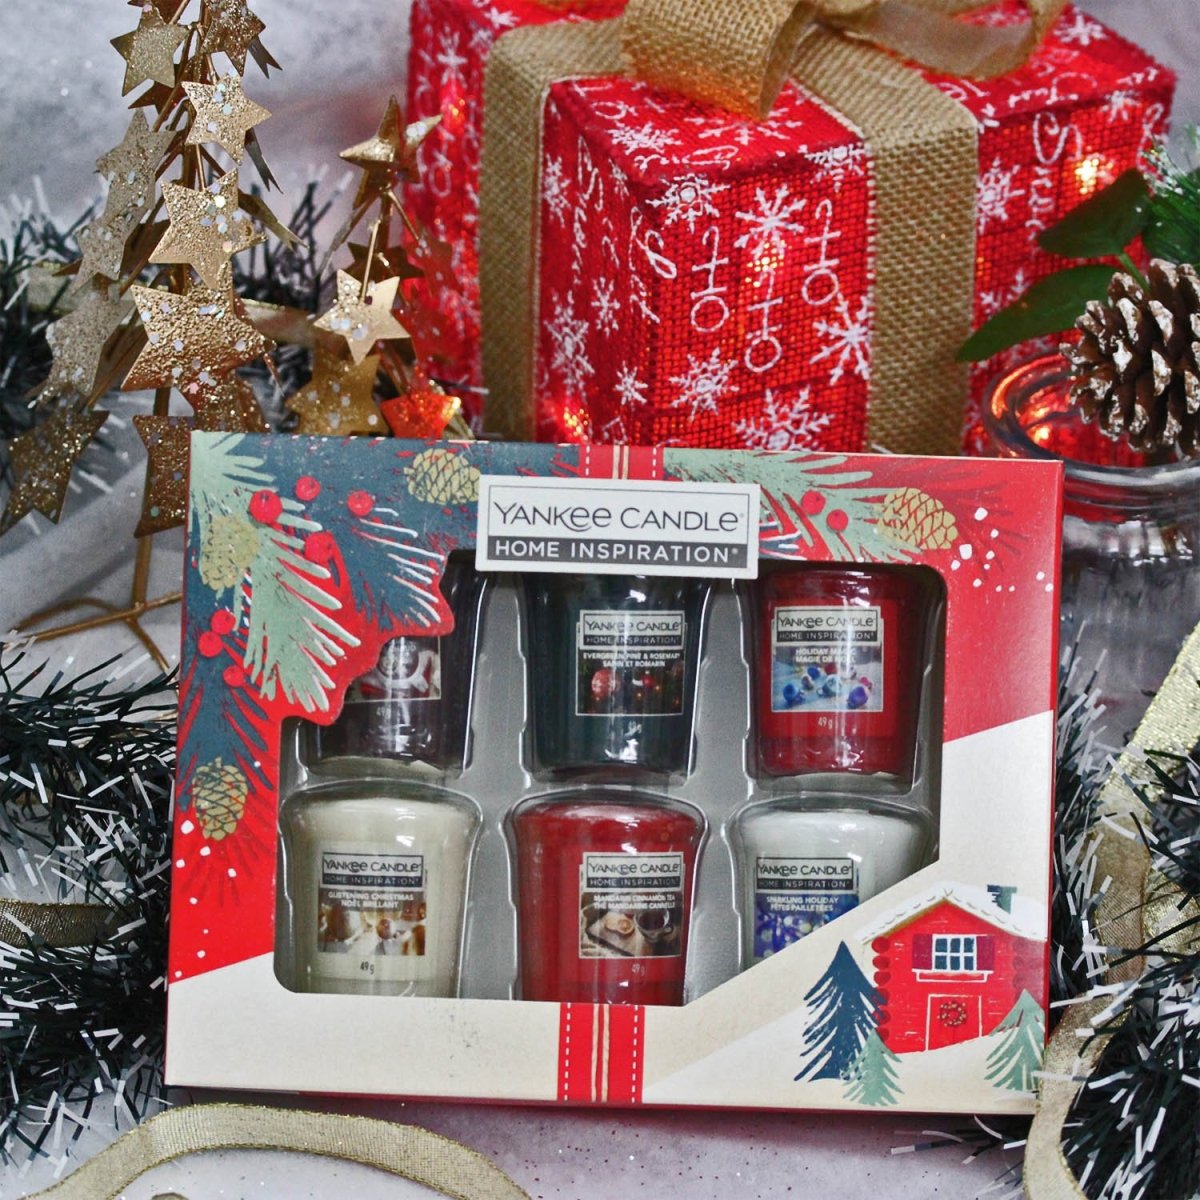 Gift Set of 6 Home Inspiration Yankee Scented Candles - Bonnypack